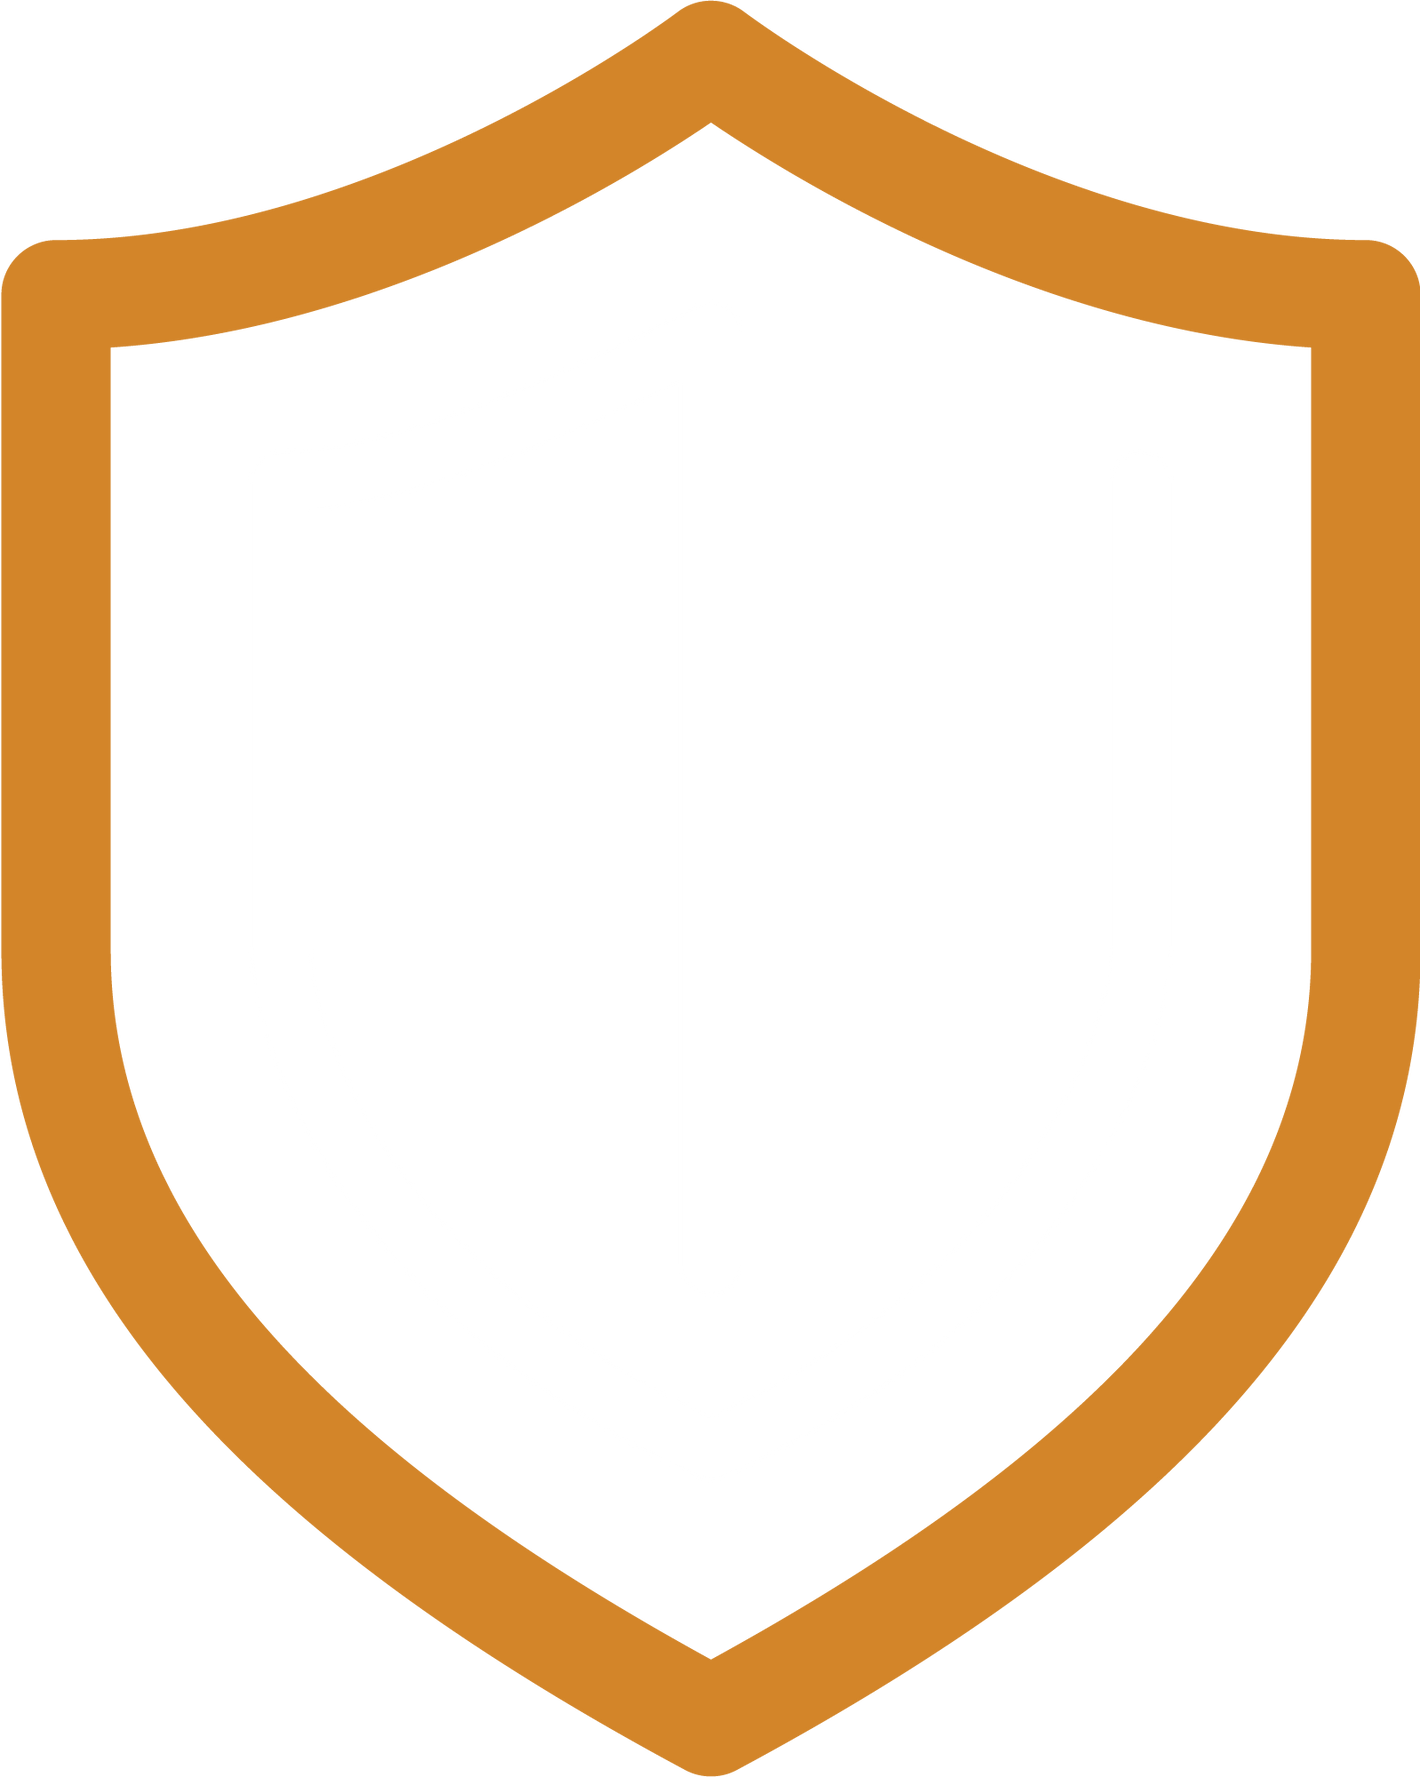 An orange and white shield illustration represents GeoGrit’s lifetime warranty.